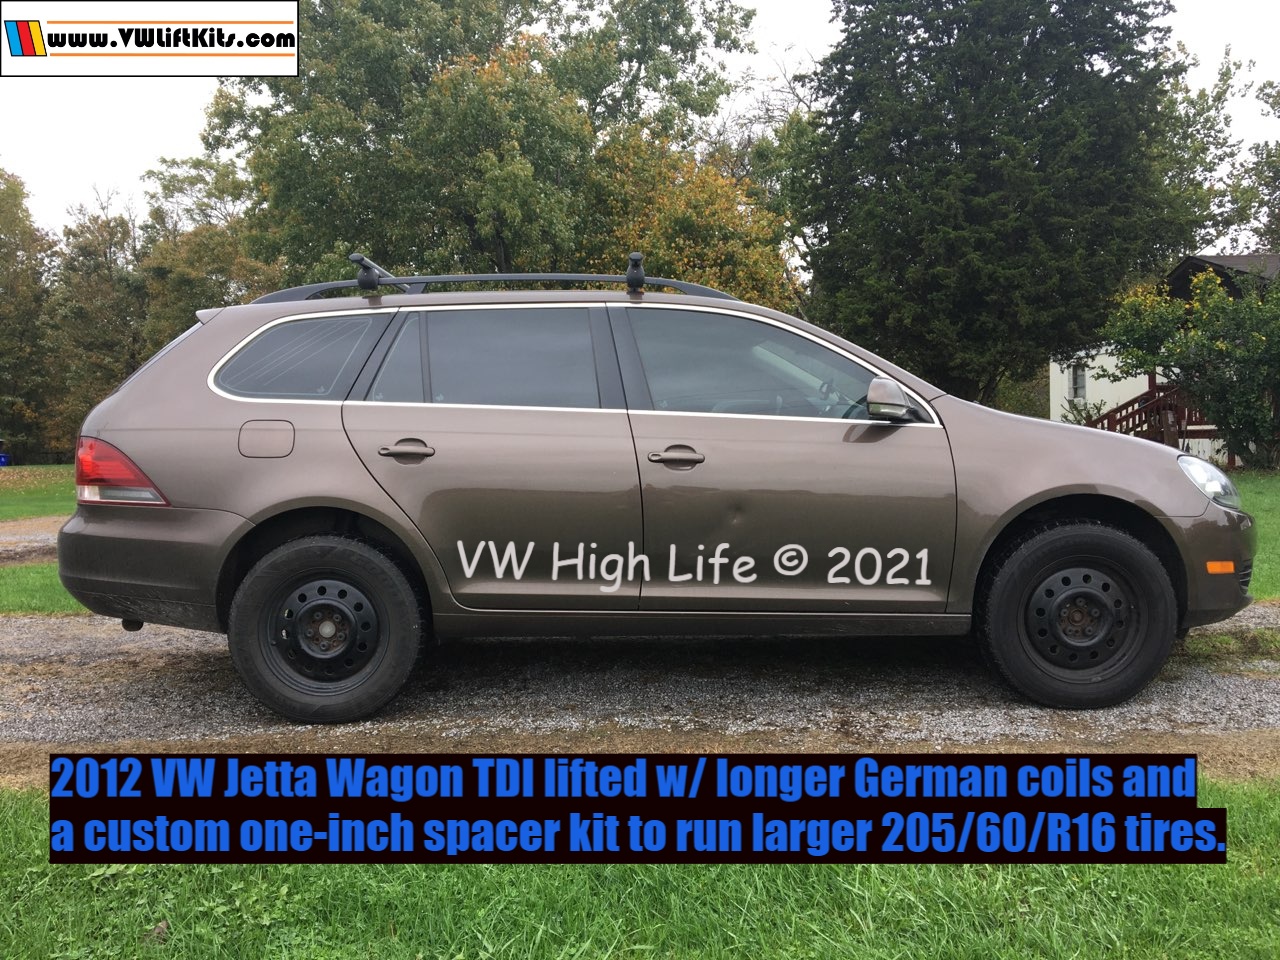 2012 Jetta Wagon TDI lifted w/ longer coils, Bilsteins, and a spacer kit to run 205/60/R16 tires.